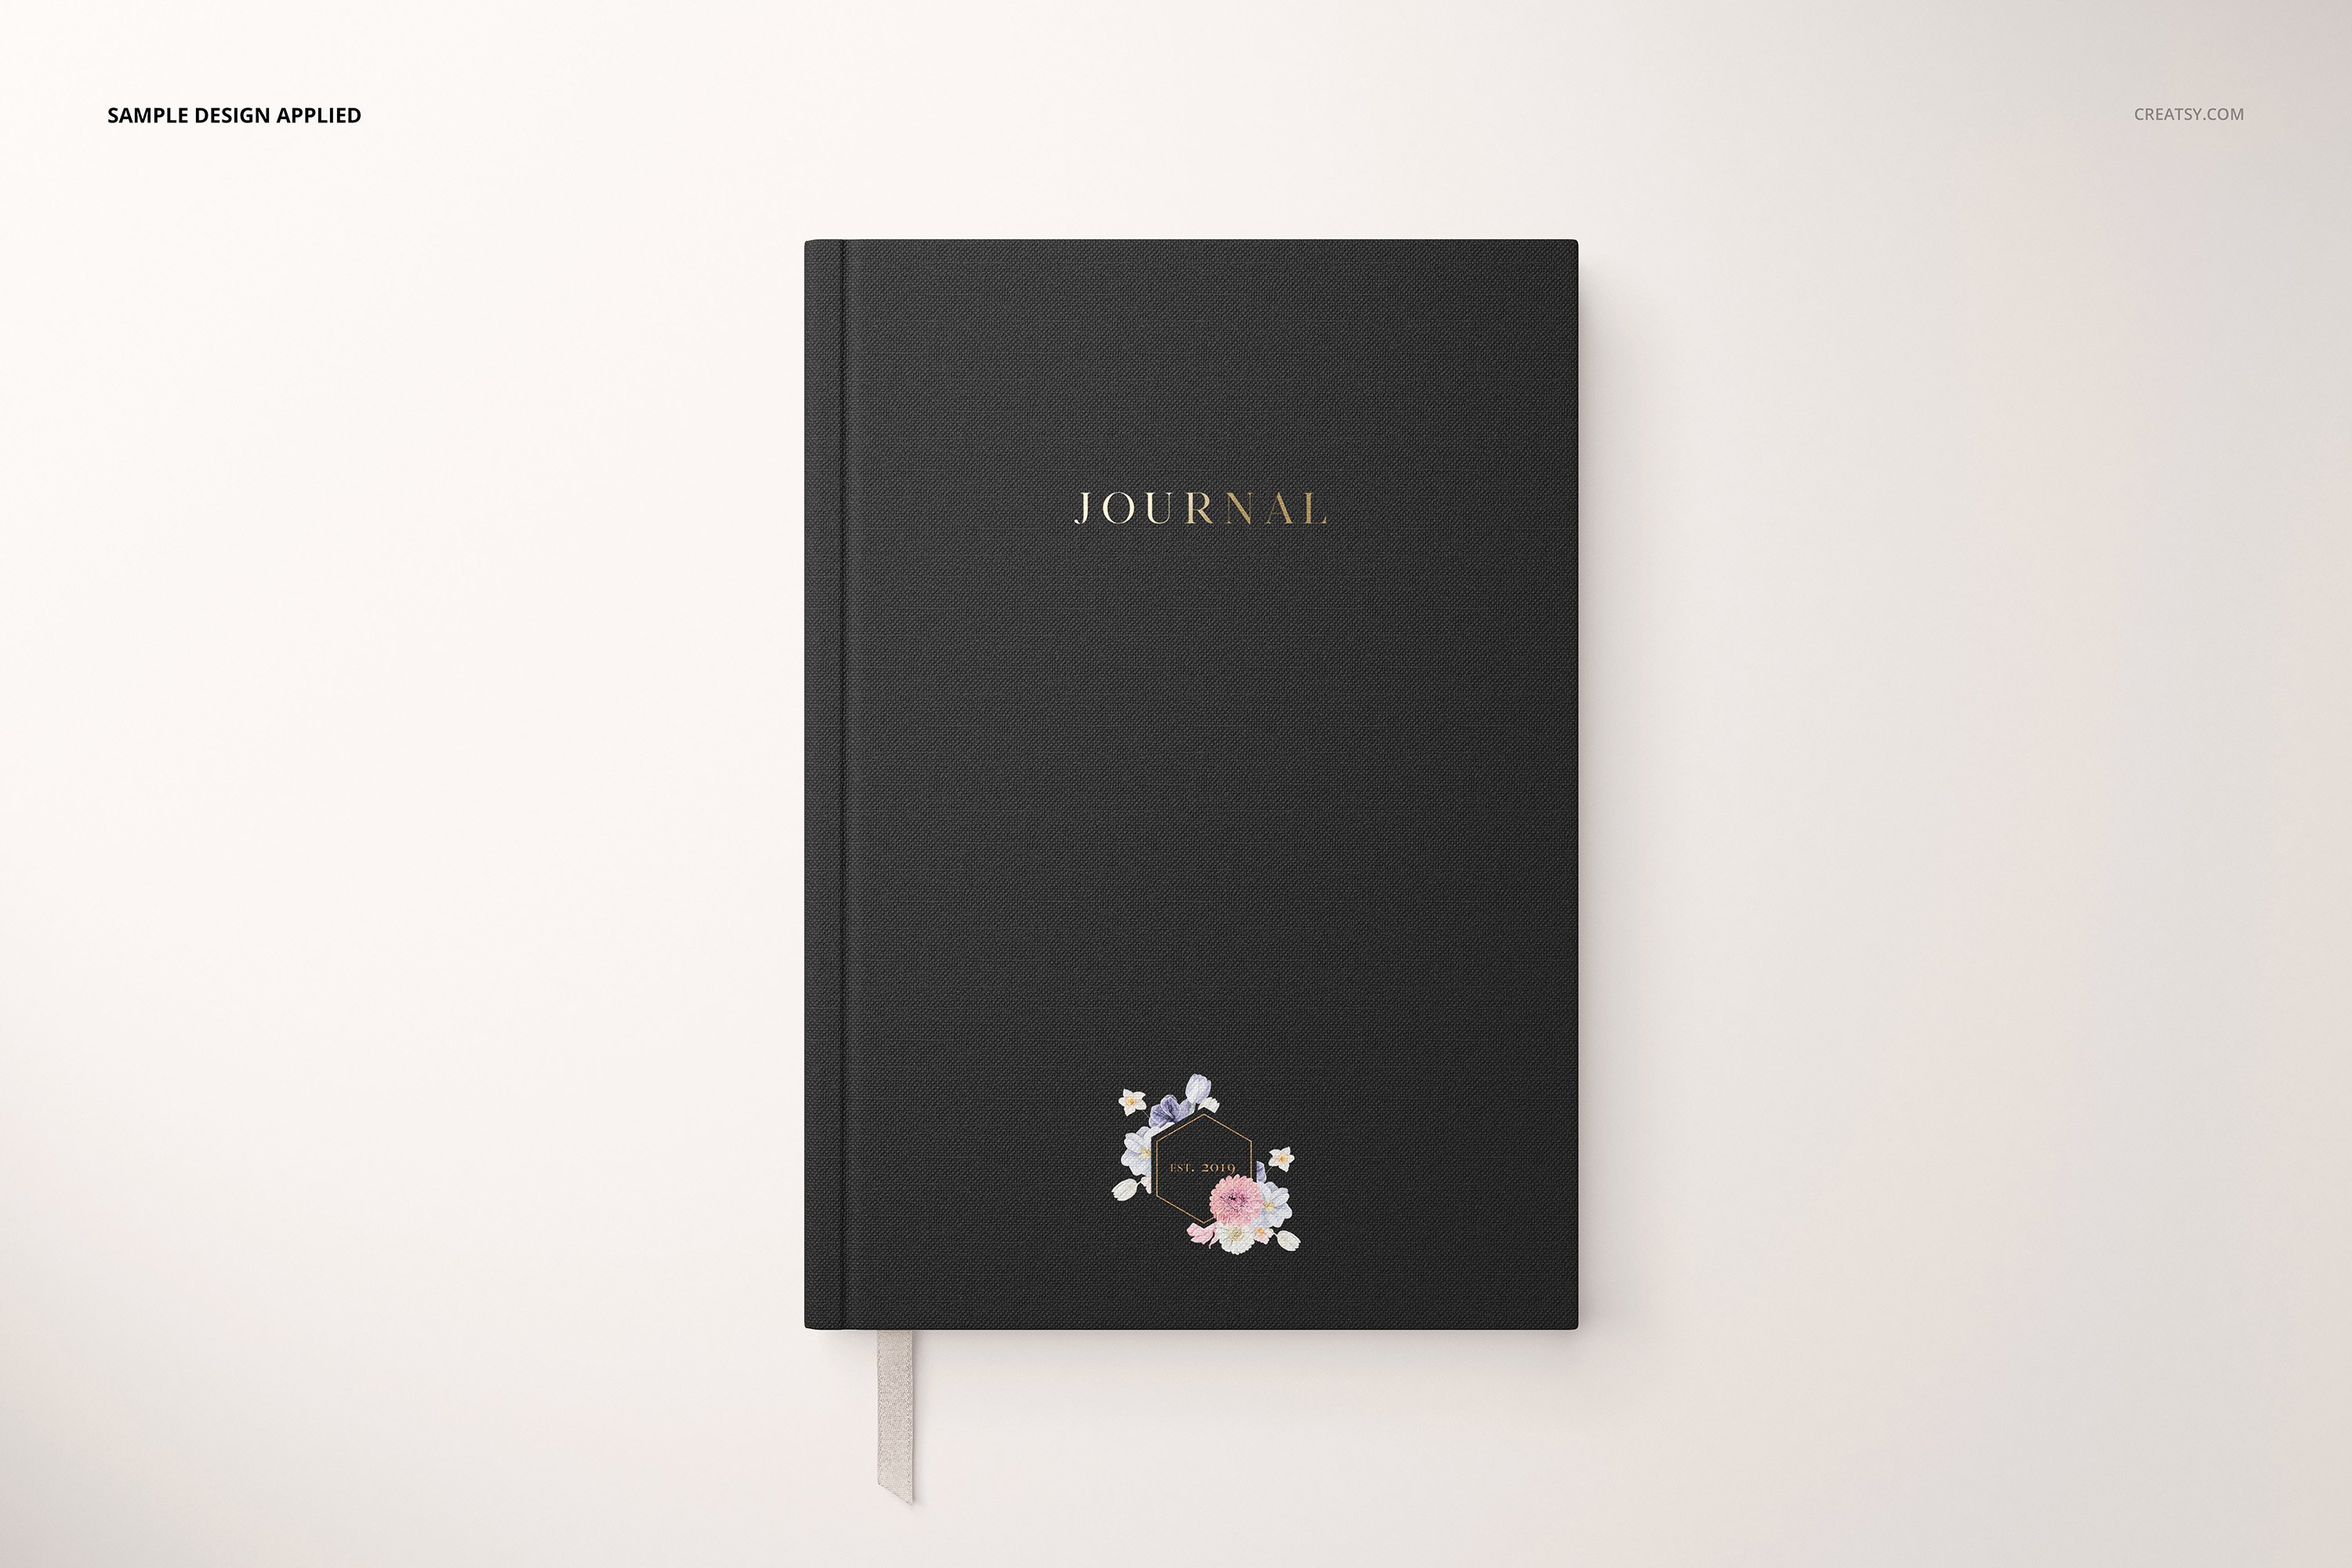 Matte black notebook with a gold font and some flowers logo.